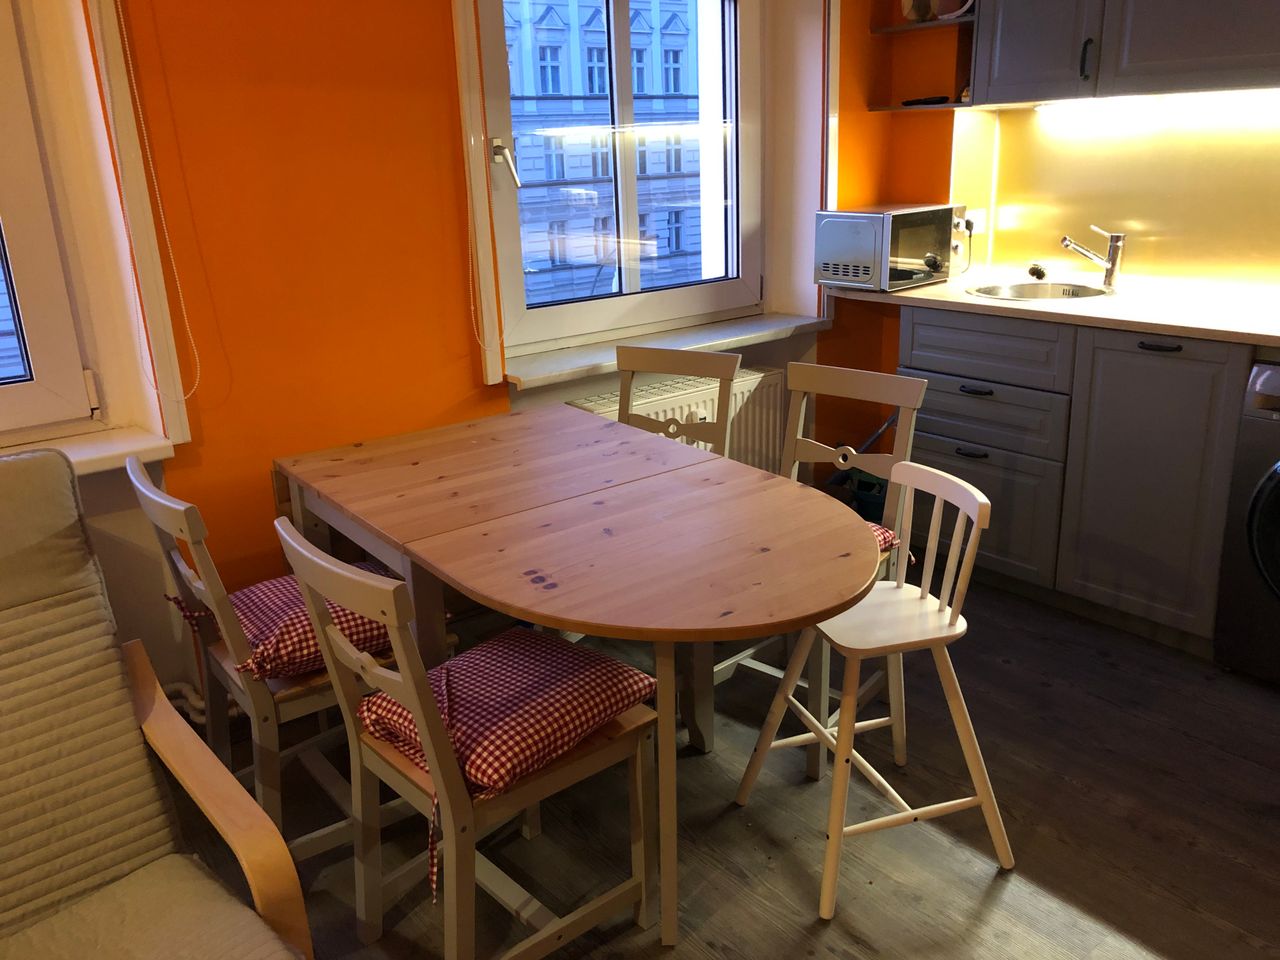 Fully furnished 2-room apartment with optional children's room or bedroom in Charlottenburg